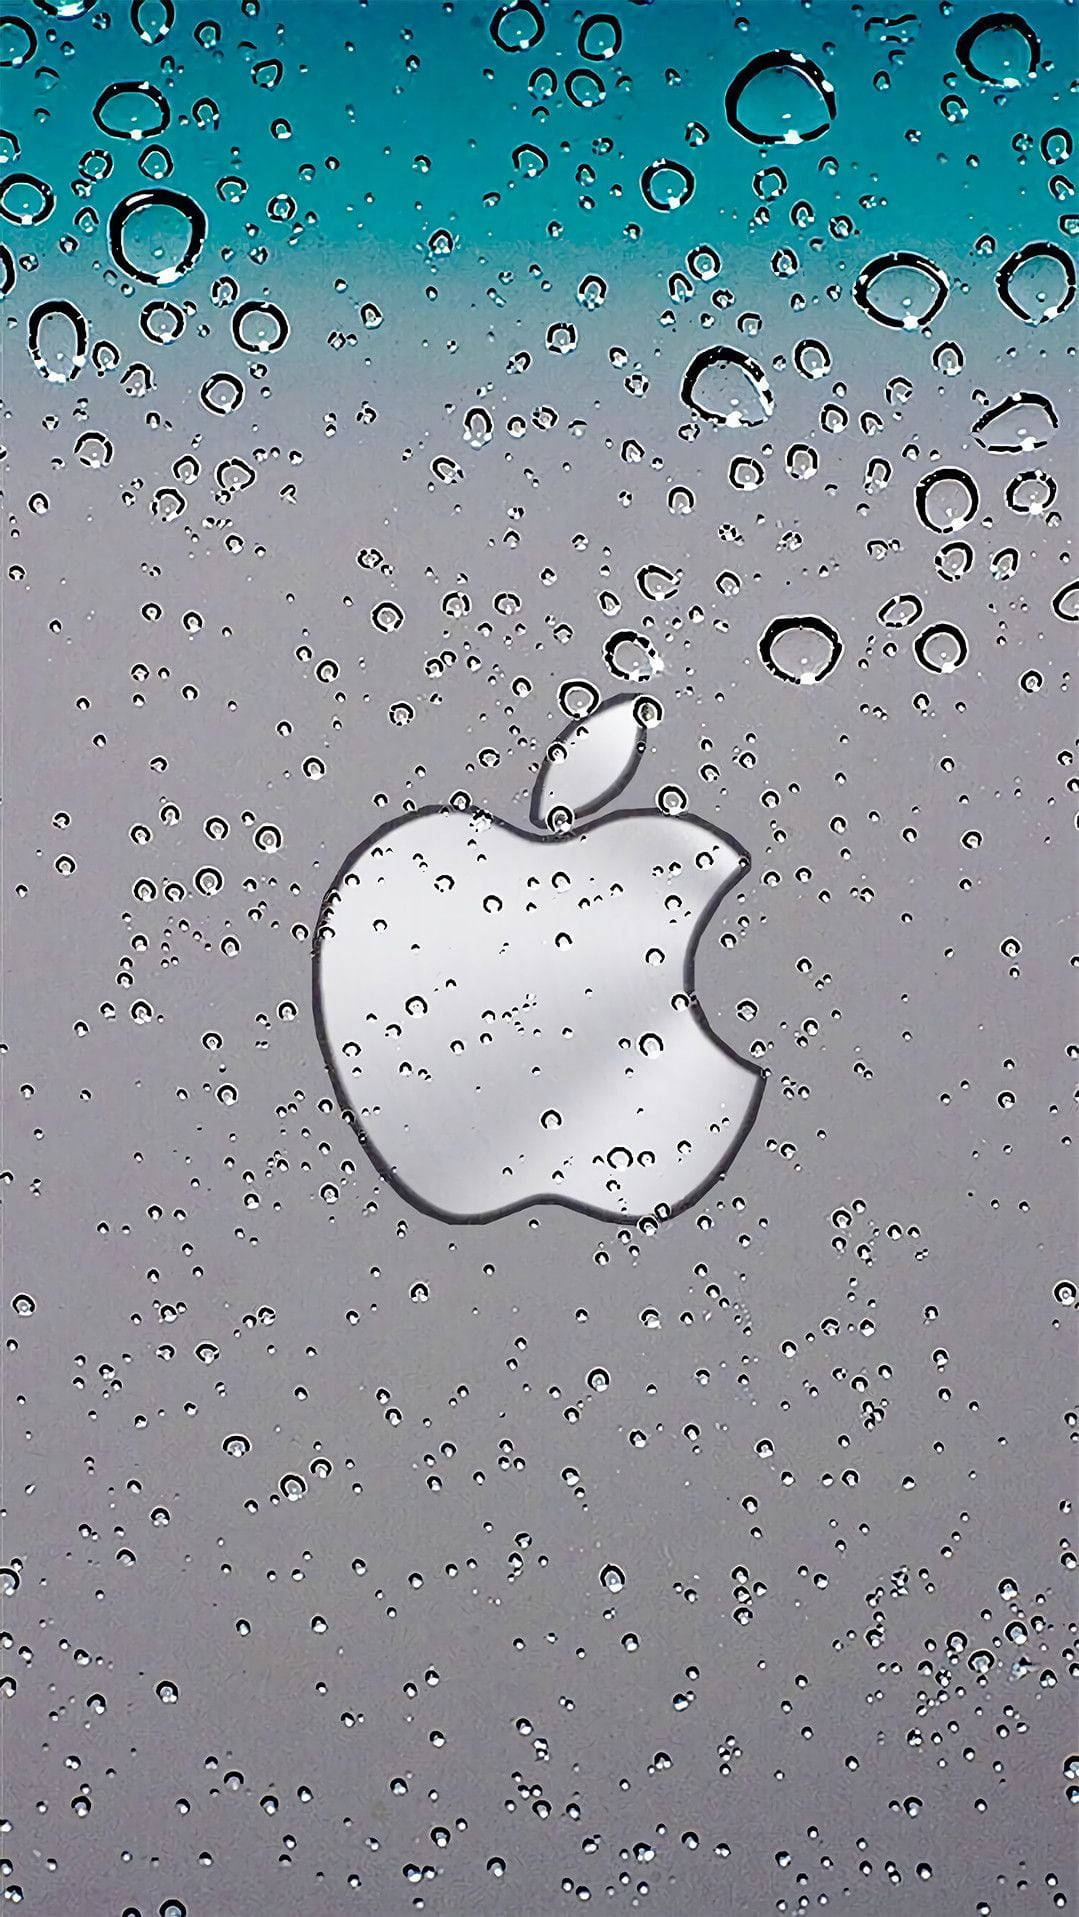 Full Hd Apple With Water Droplets Wallpaper